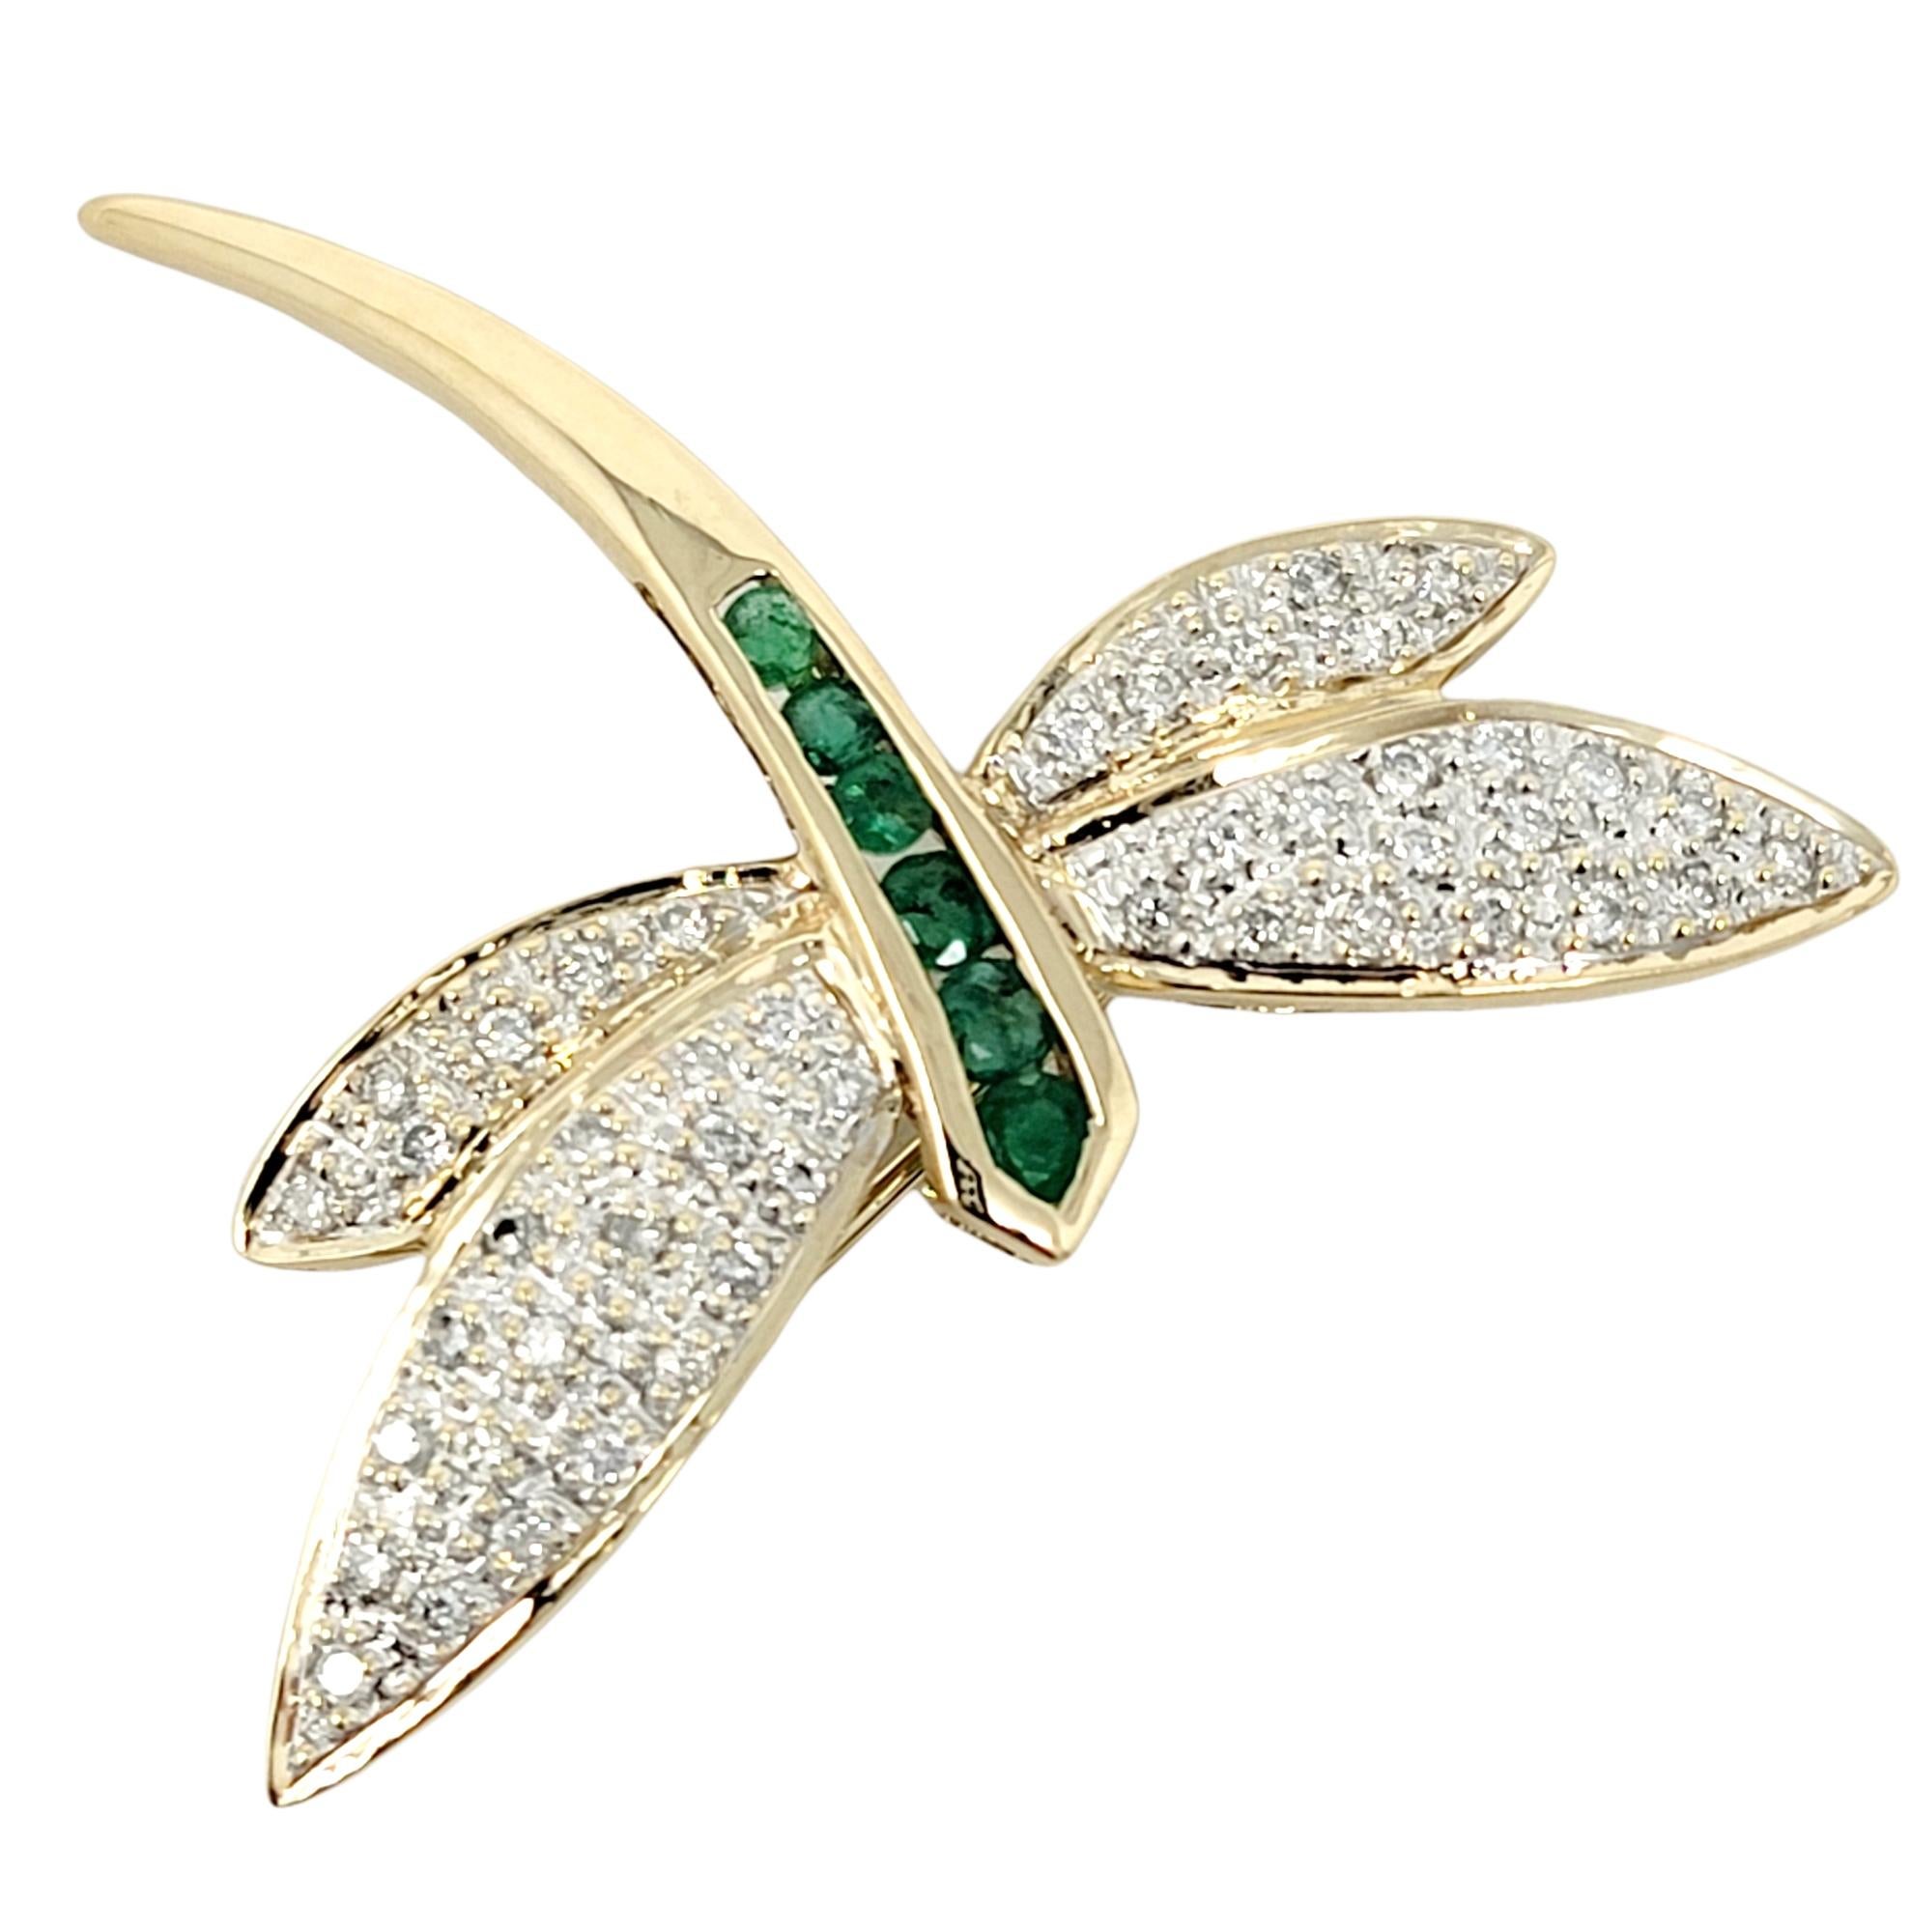 Contemporary Emerald and Diamond Dragonfly Brooch in 14 Karat Yellow Gold .75 Carats Total